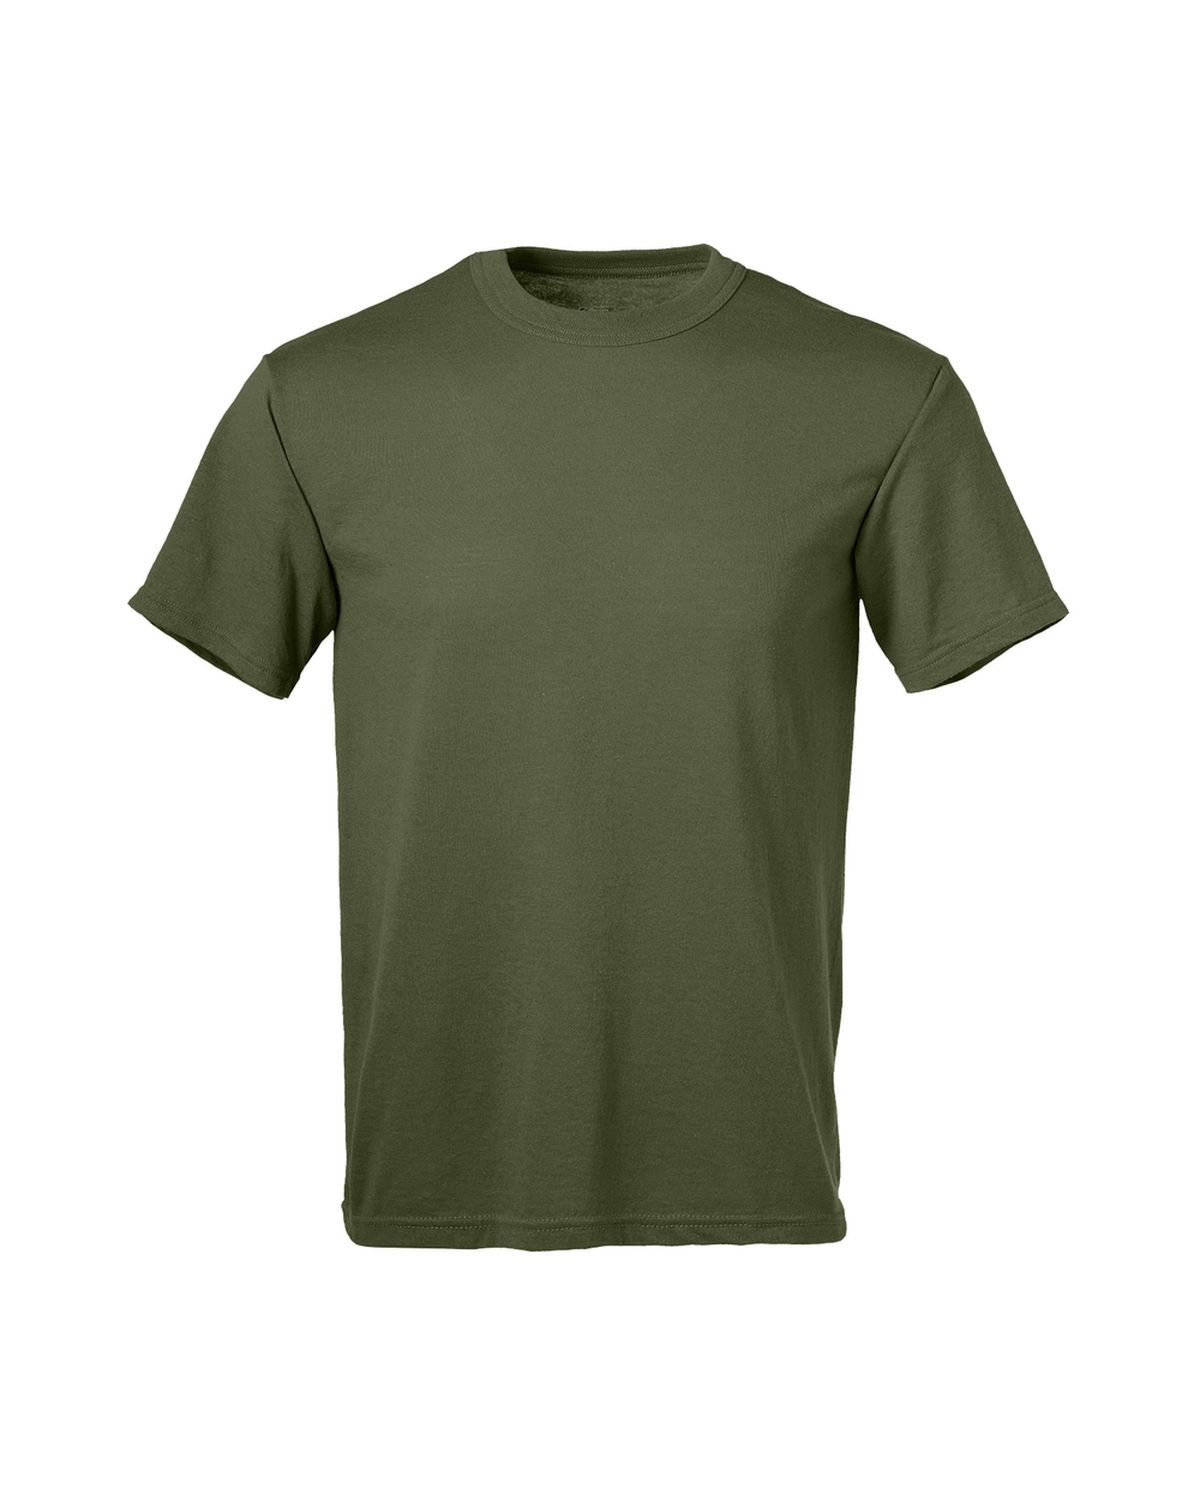 'Delta M280 Soffe Adult Unisex 50/50 Military Tee USA'